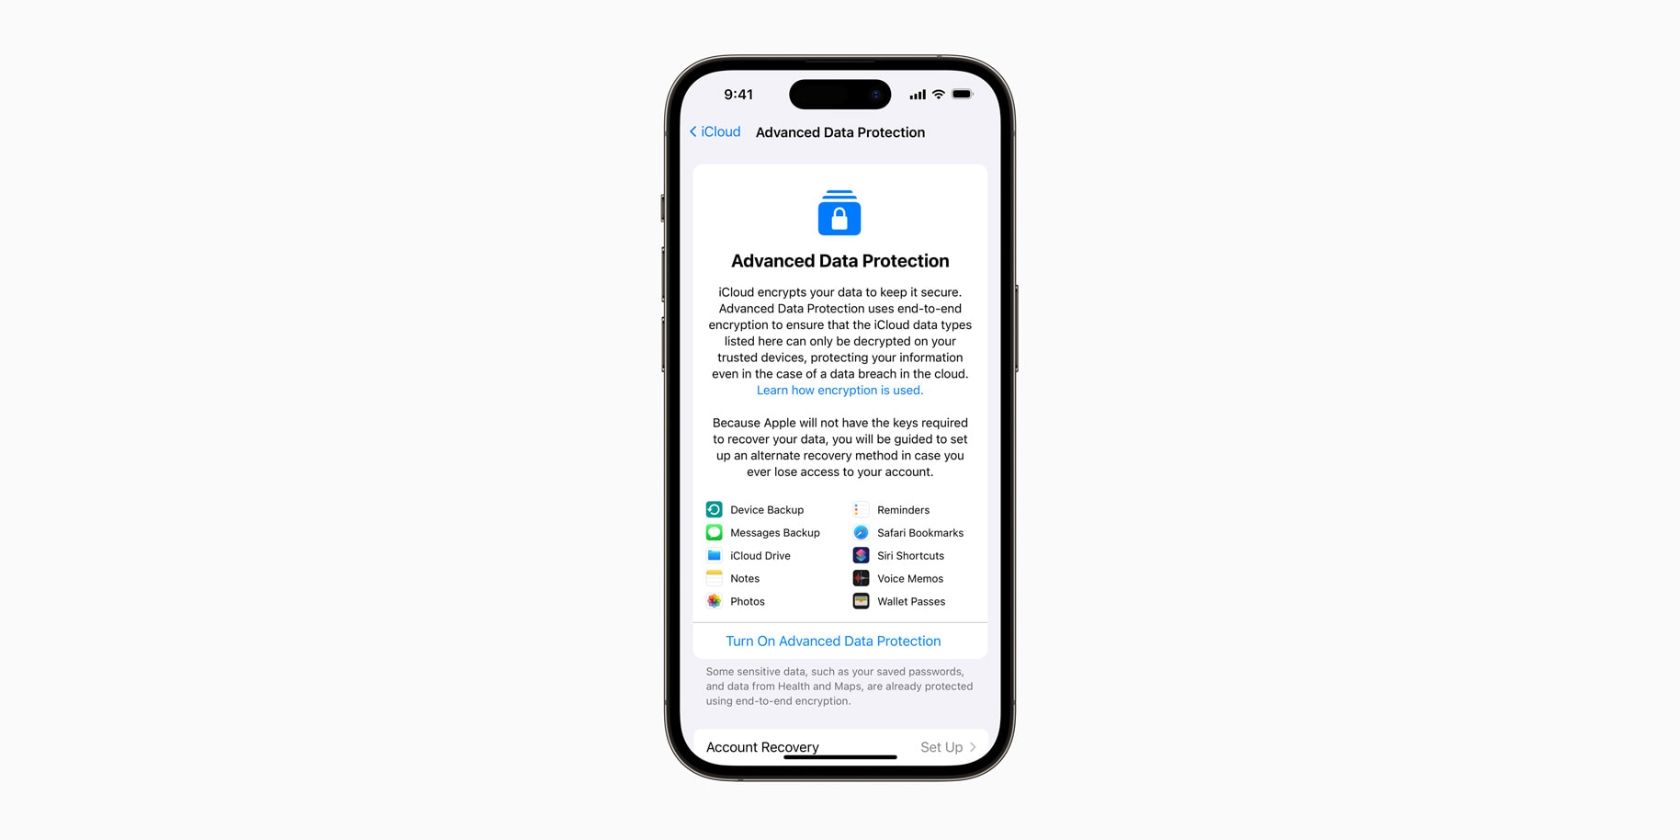 An iPhone showing the newly data categories that are protected by Apple's Advanced Data Protection.